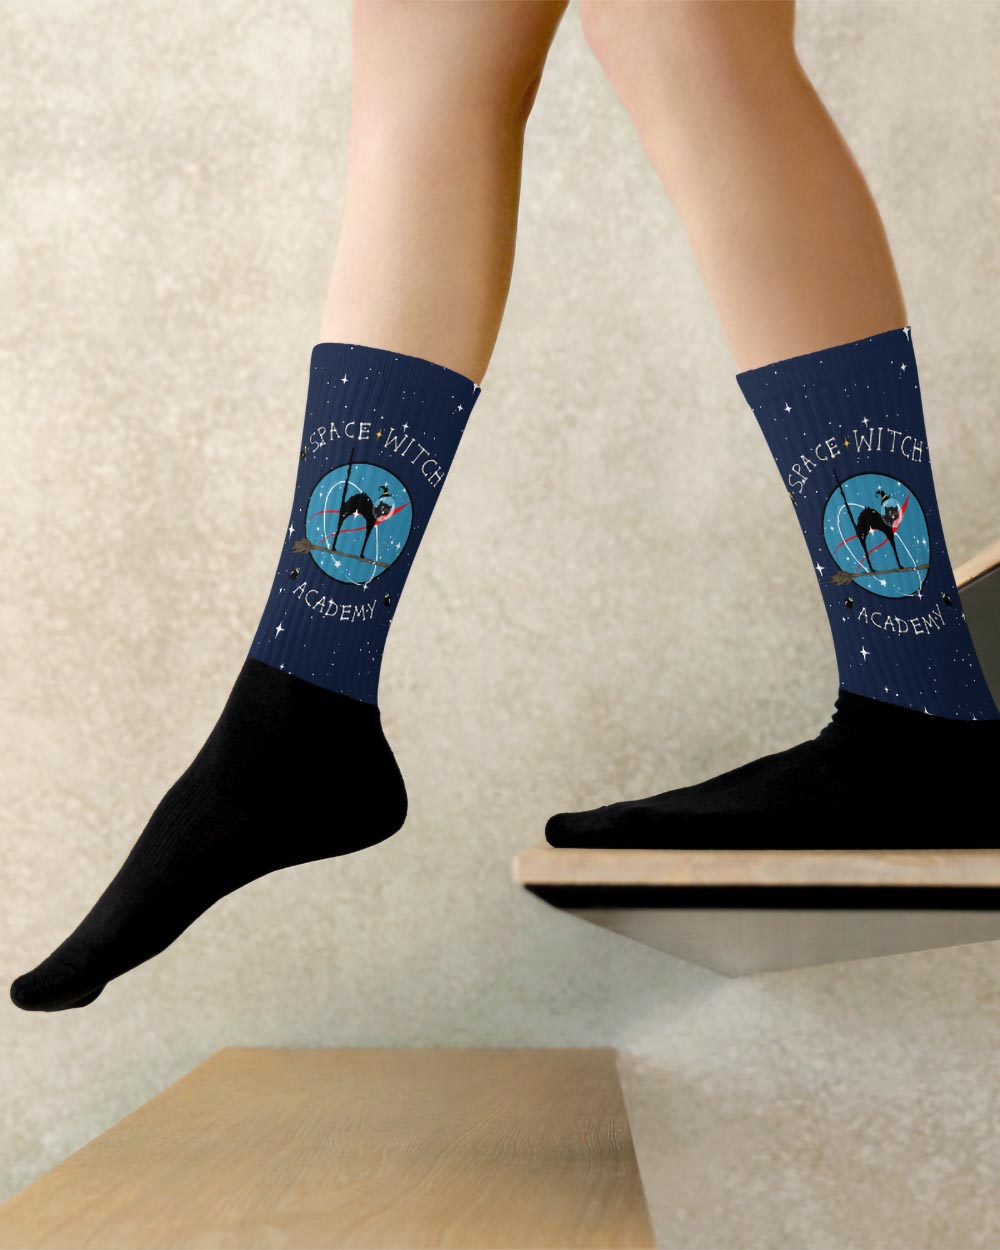 Space Witch Academy Socks - Vegan Unisex Goth Spooky Socks Witchy Alt Style Cool Gothic Gifts for Him and Her